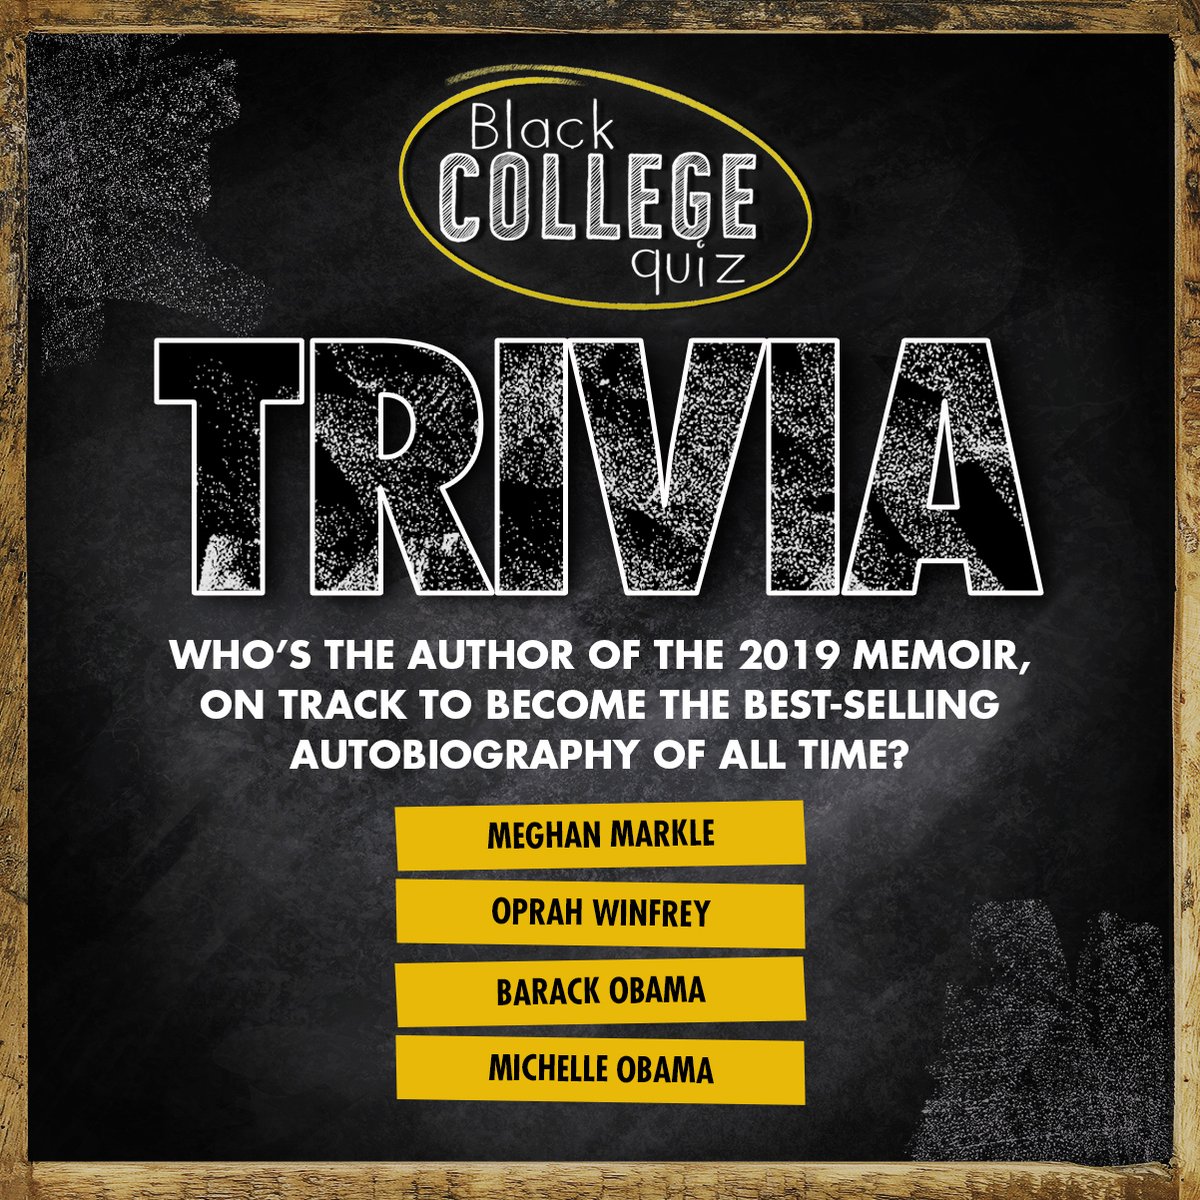 Here's a @blkcollegequiz trivia question: WHO’S THE AUTHOR OF THE 2019 MEMOIR, ON TRACK TO BECOME THE BEST-SELLING AUTOBIOGRAPHY OF ALL TIME? Drop your guesses below! 💭✍️ Don't forget to come back on Monday for the big reveal! #BlackCollegeQuiz #TriviaChallenge #BrainyVibes